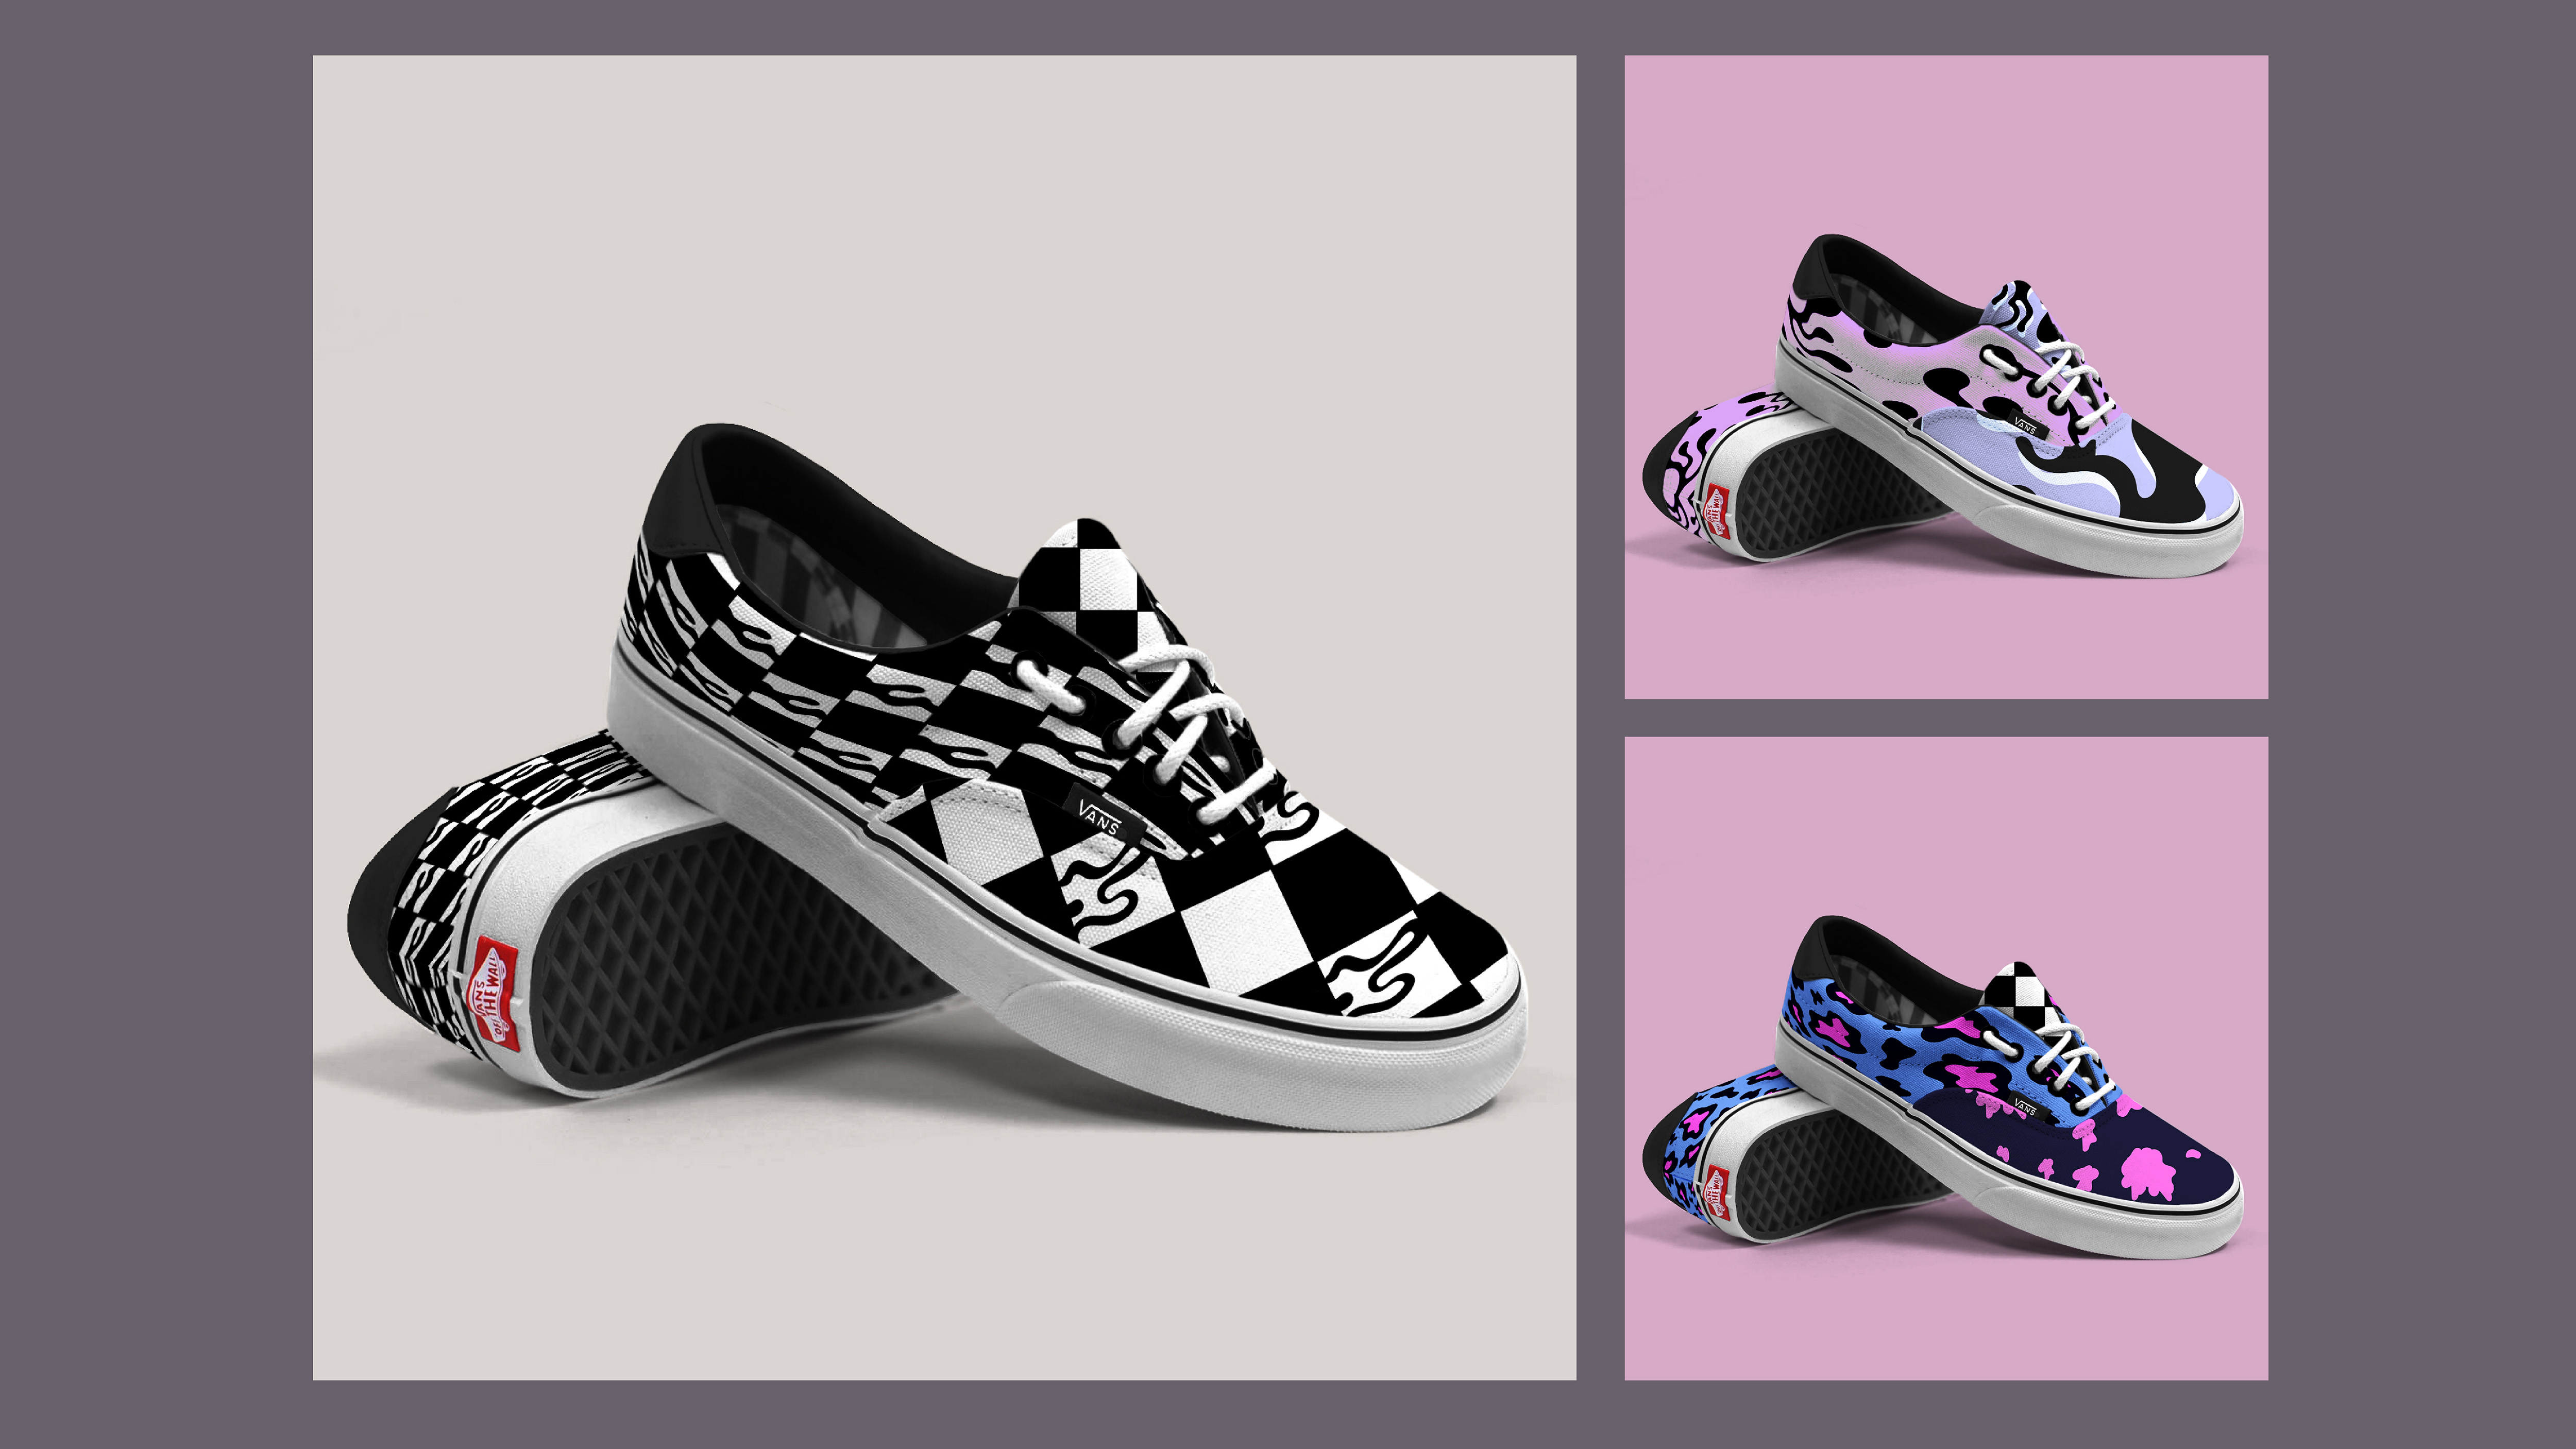 Vans Shoe Mockup / "Vans Shoe Mockup," Shoe design, 8"x 2.75"x 3.5", product, 2022 and 2023. The Shoe Mockups are an example of product design. The objective of this project was to be able to experiment with texture and pattern on a shoe.